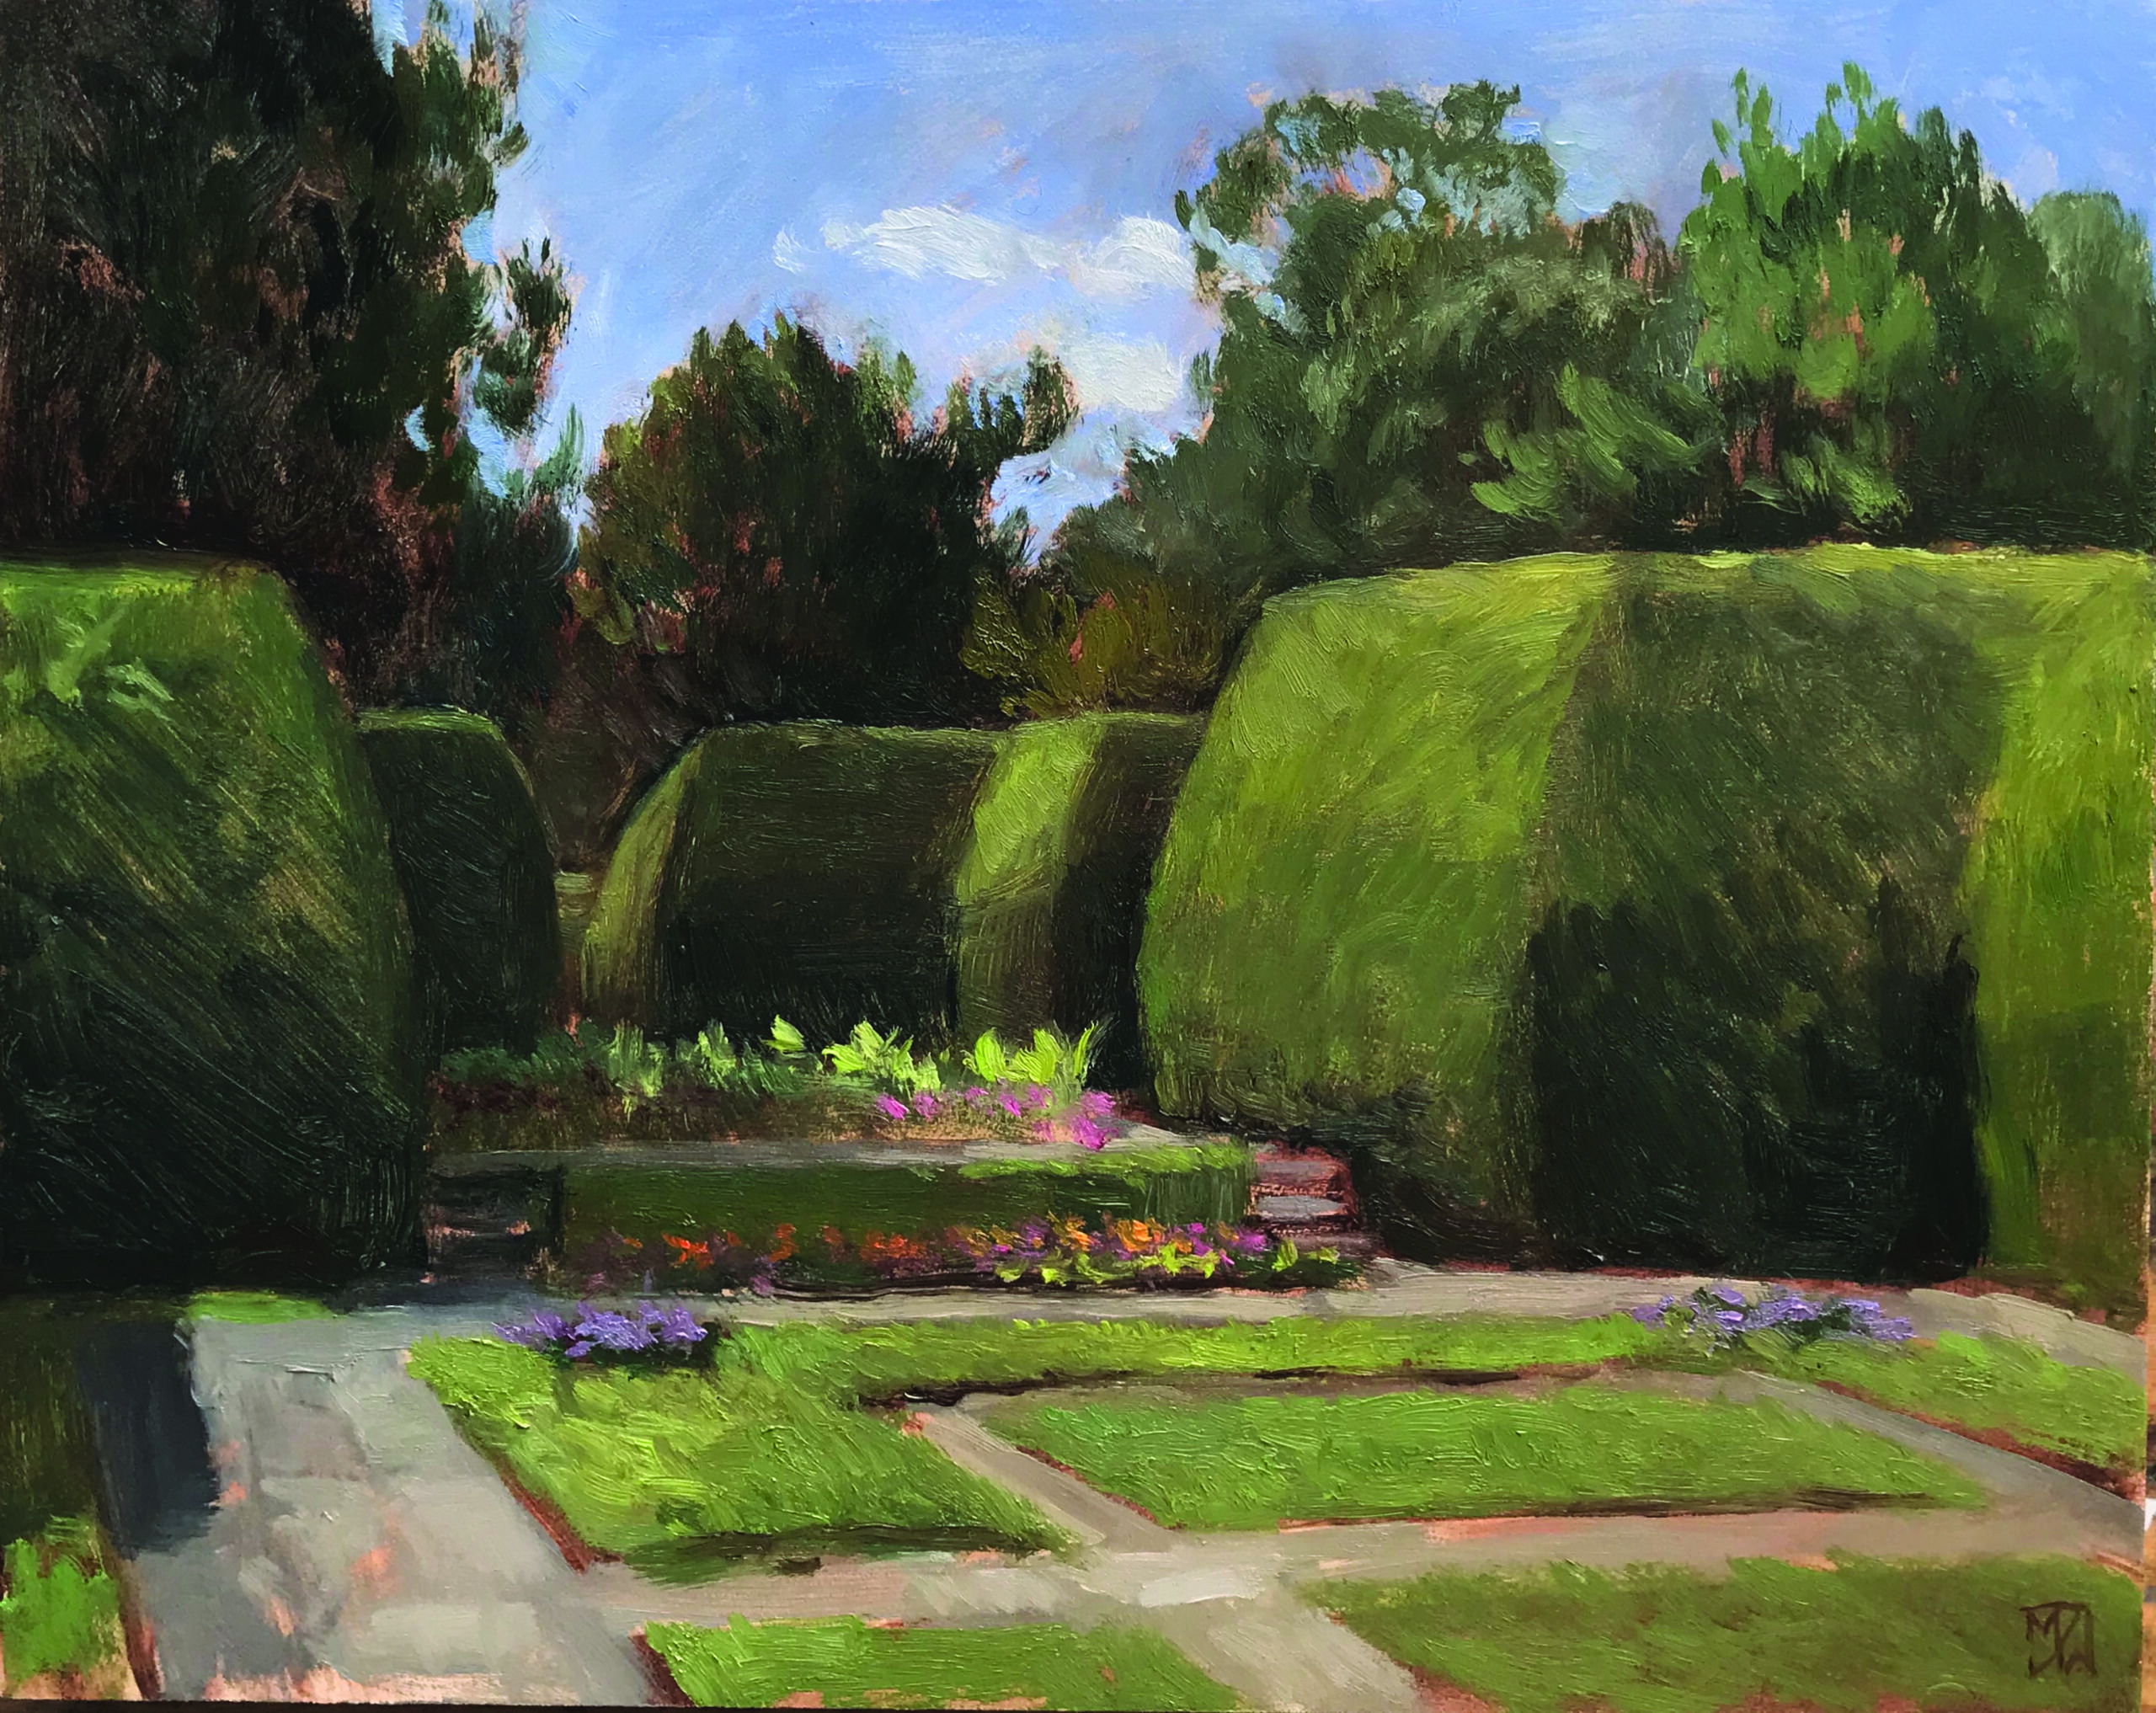 Mary Jane Ward, "Through the Hedges, Kingwood Gardens," 2020, oil, 8 x 10 in., Collection the artist